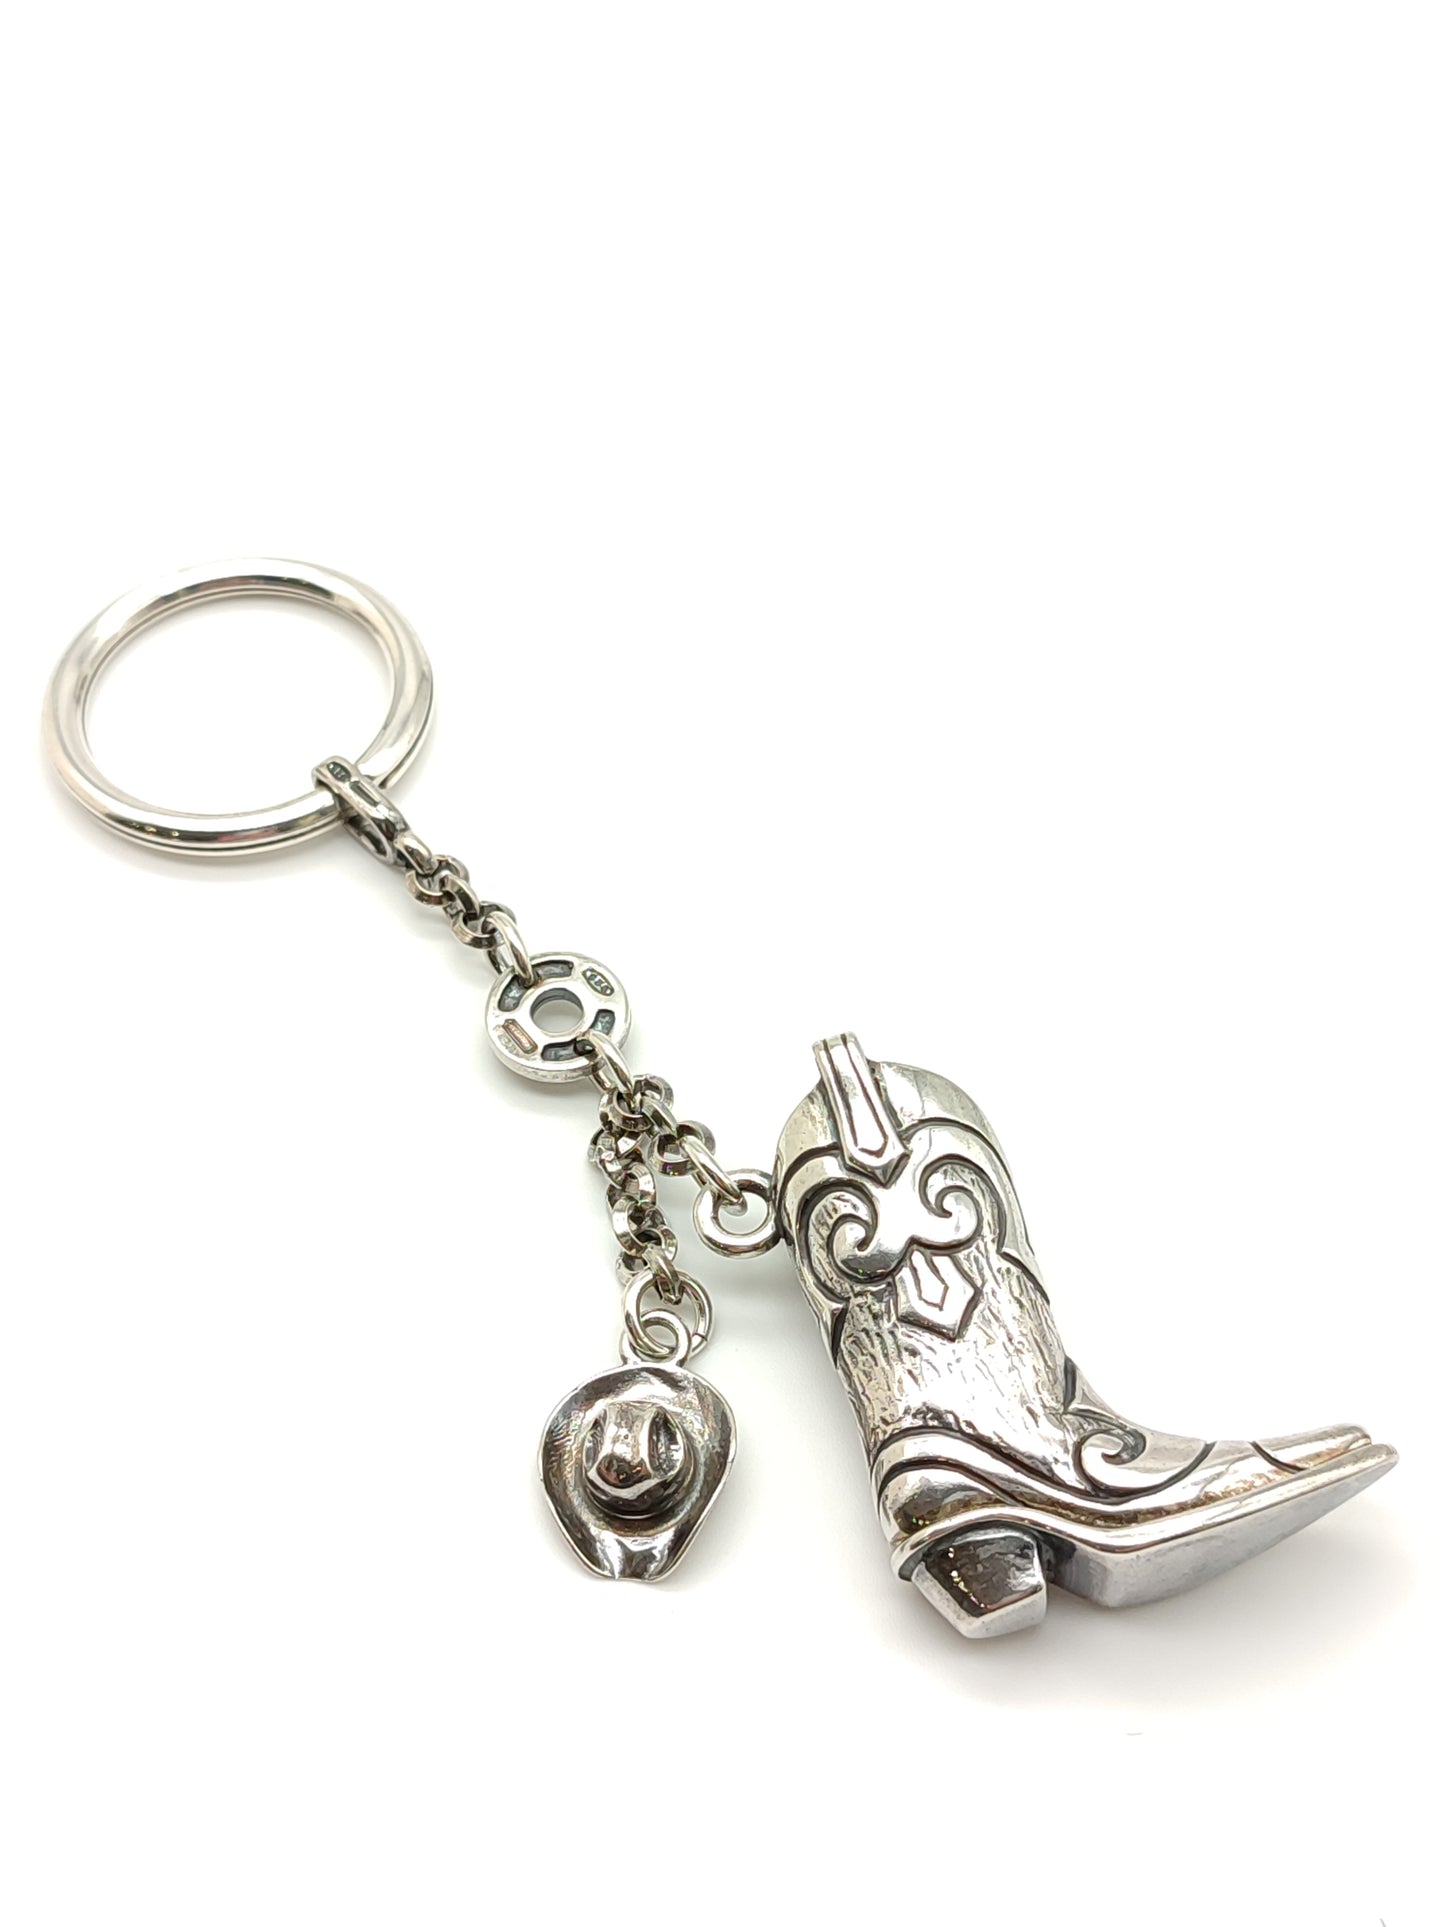 Silver keychain with cowboy boot and hat